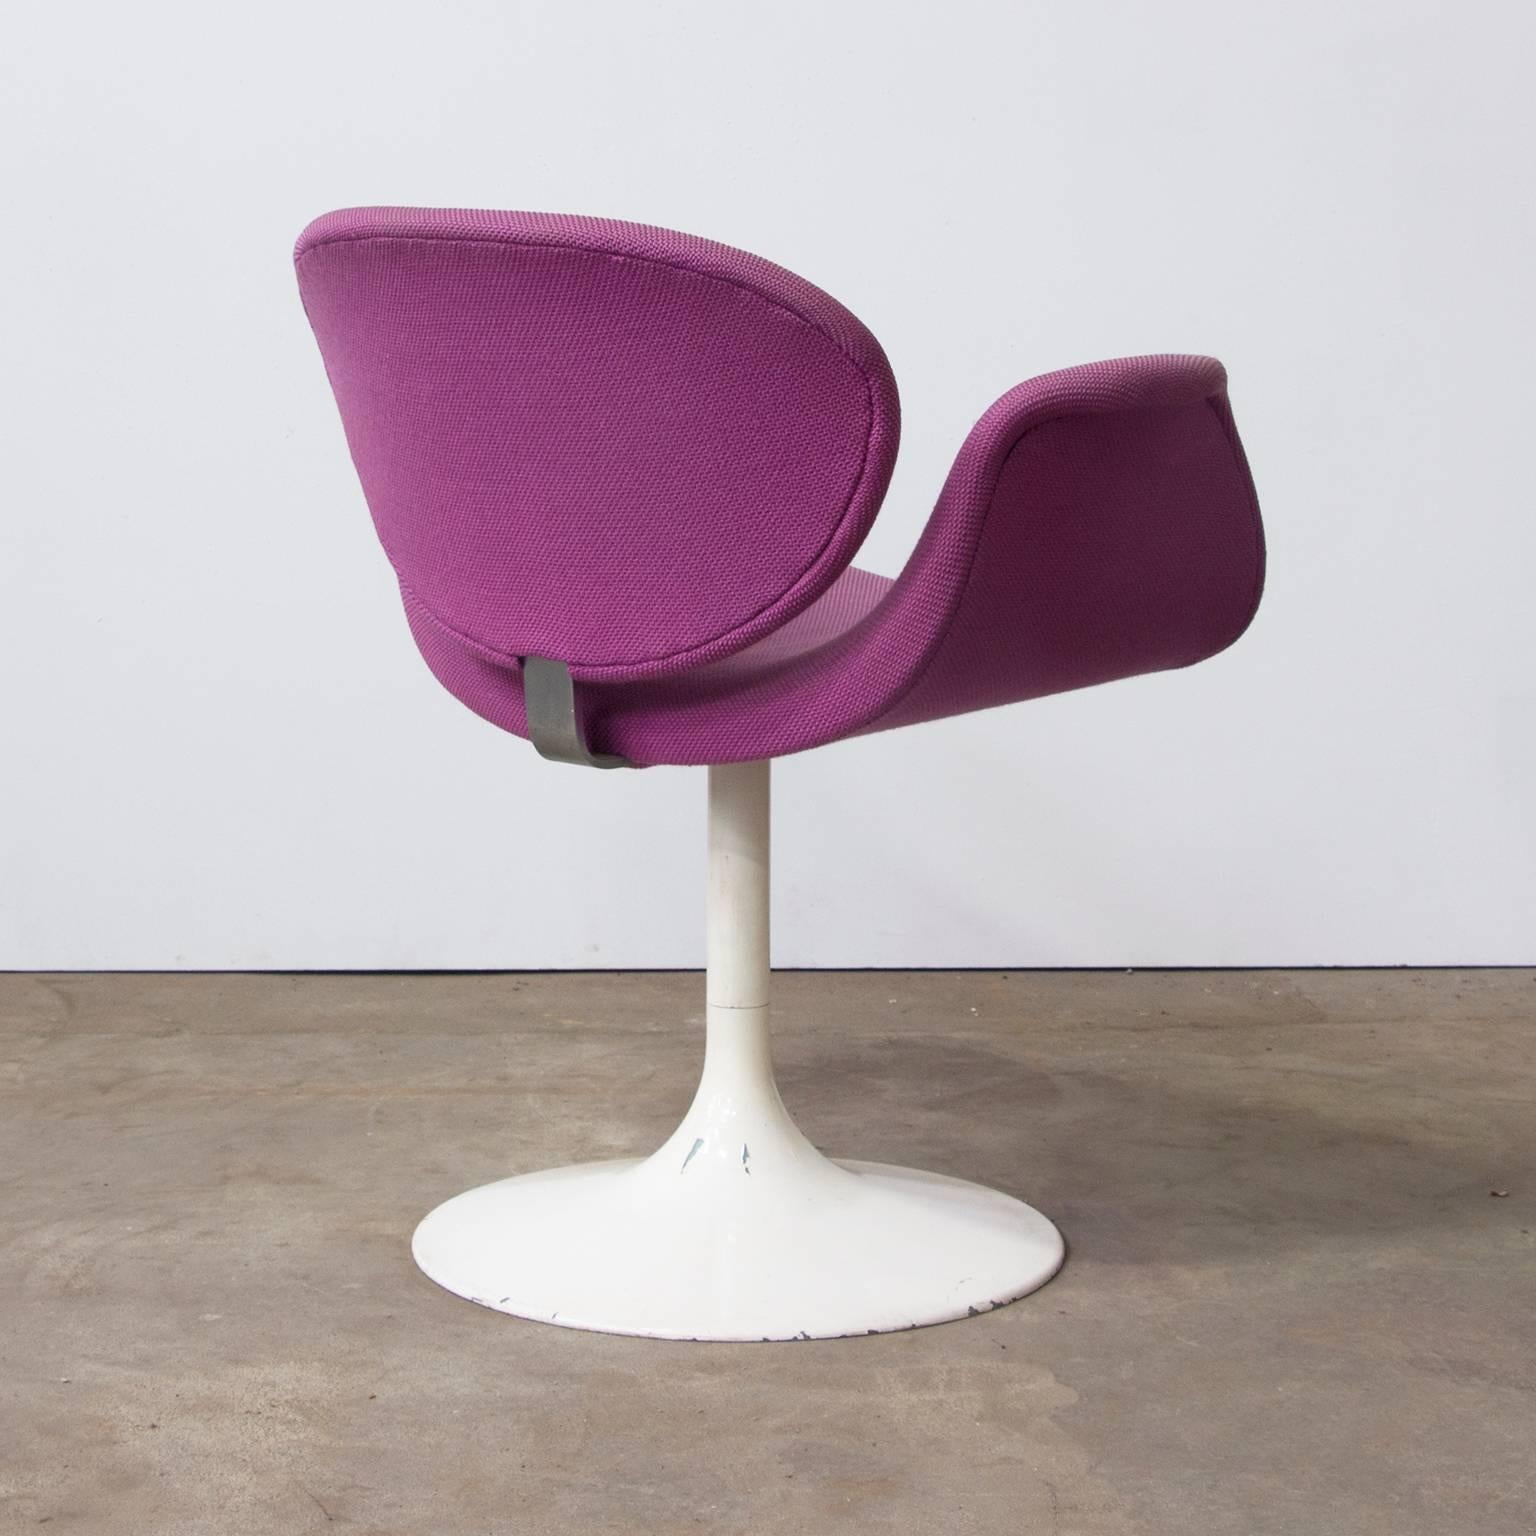 Mid-Century Modern 1965, Pierre Paulin for Artifort, Very Early Version with Original Base & Fabric